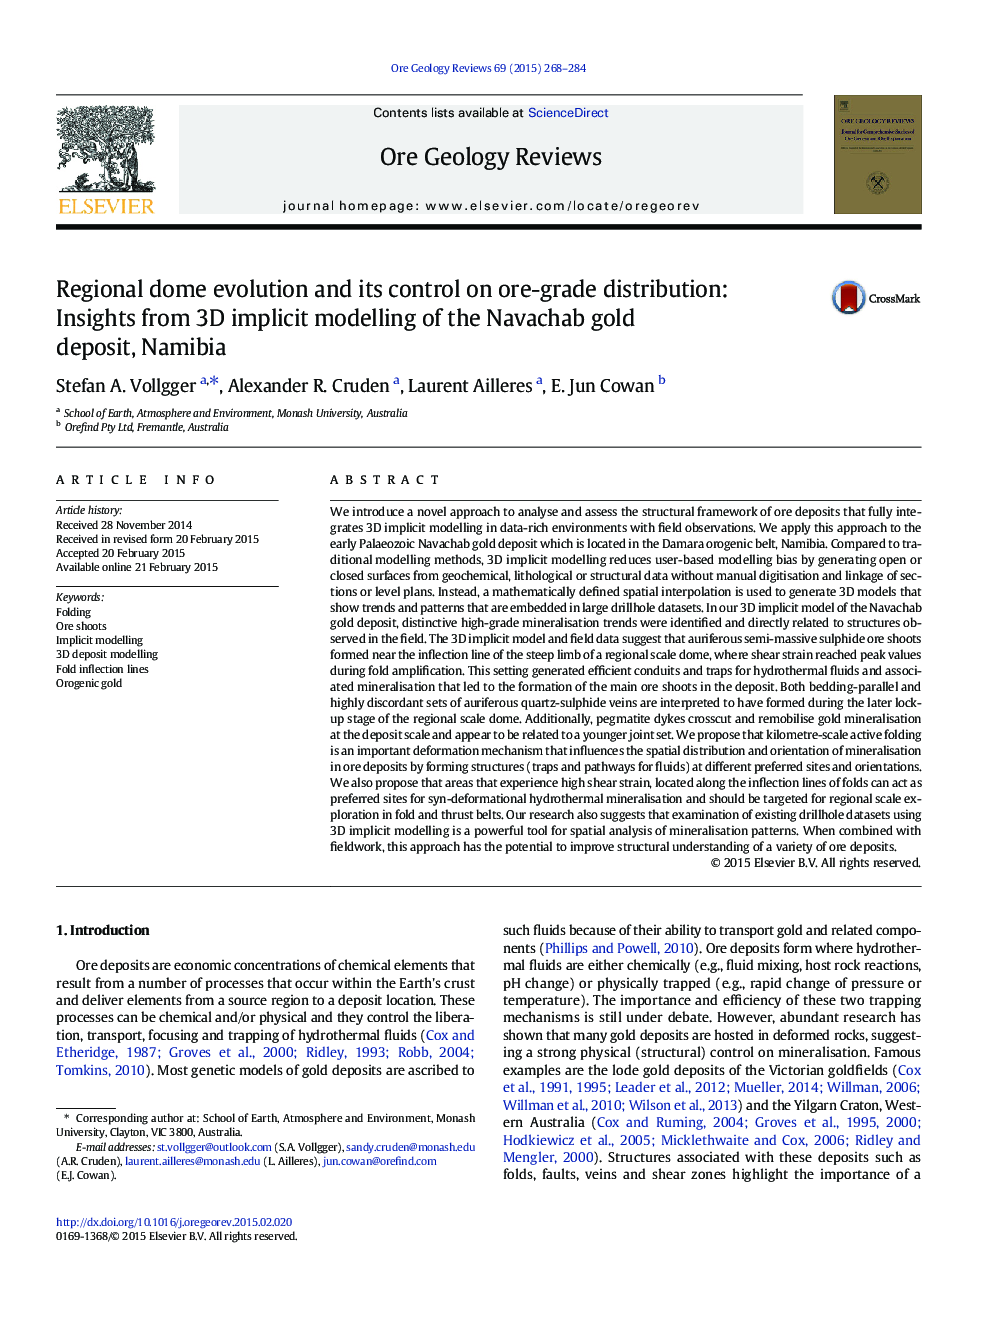 Regional dome evolution and its control on ore-grade distribution: Insights from 3D implicit modelling of the Navachab gold deposit, Namibia